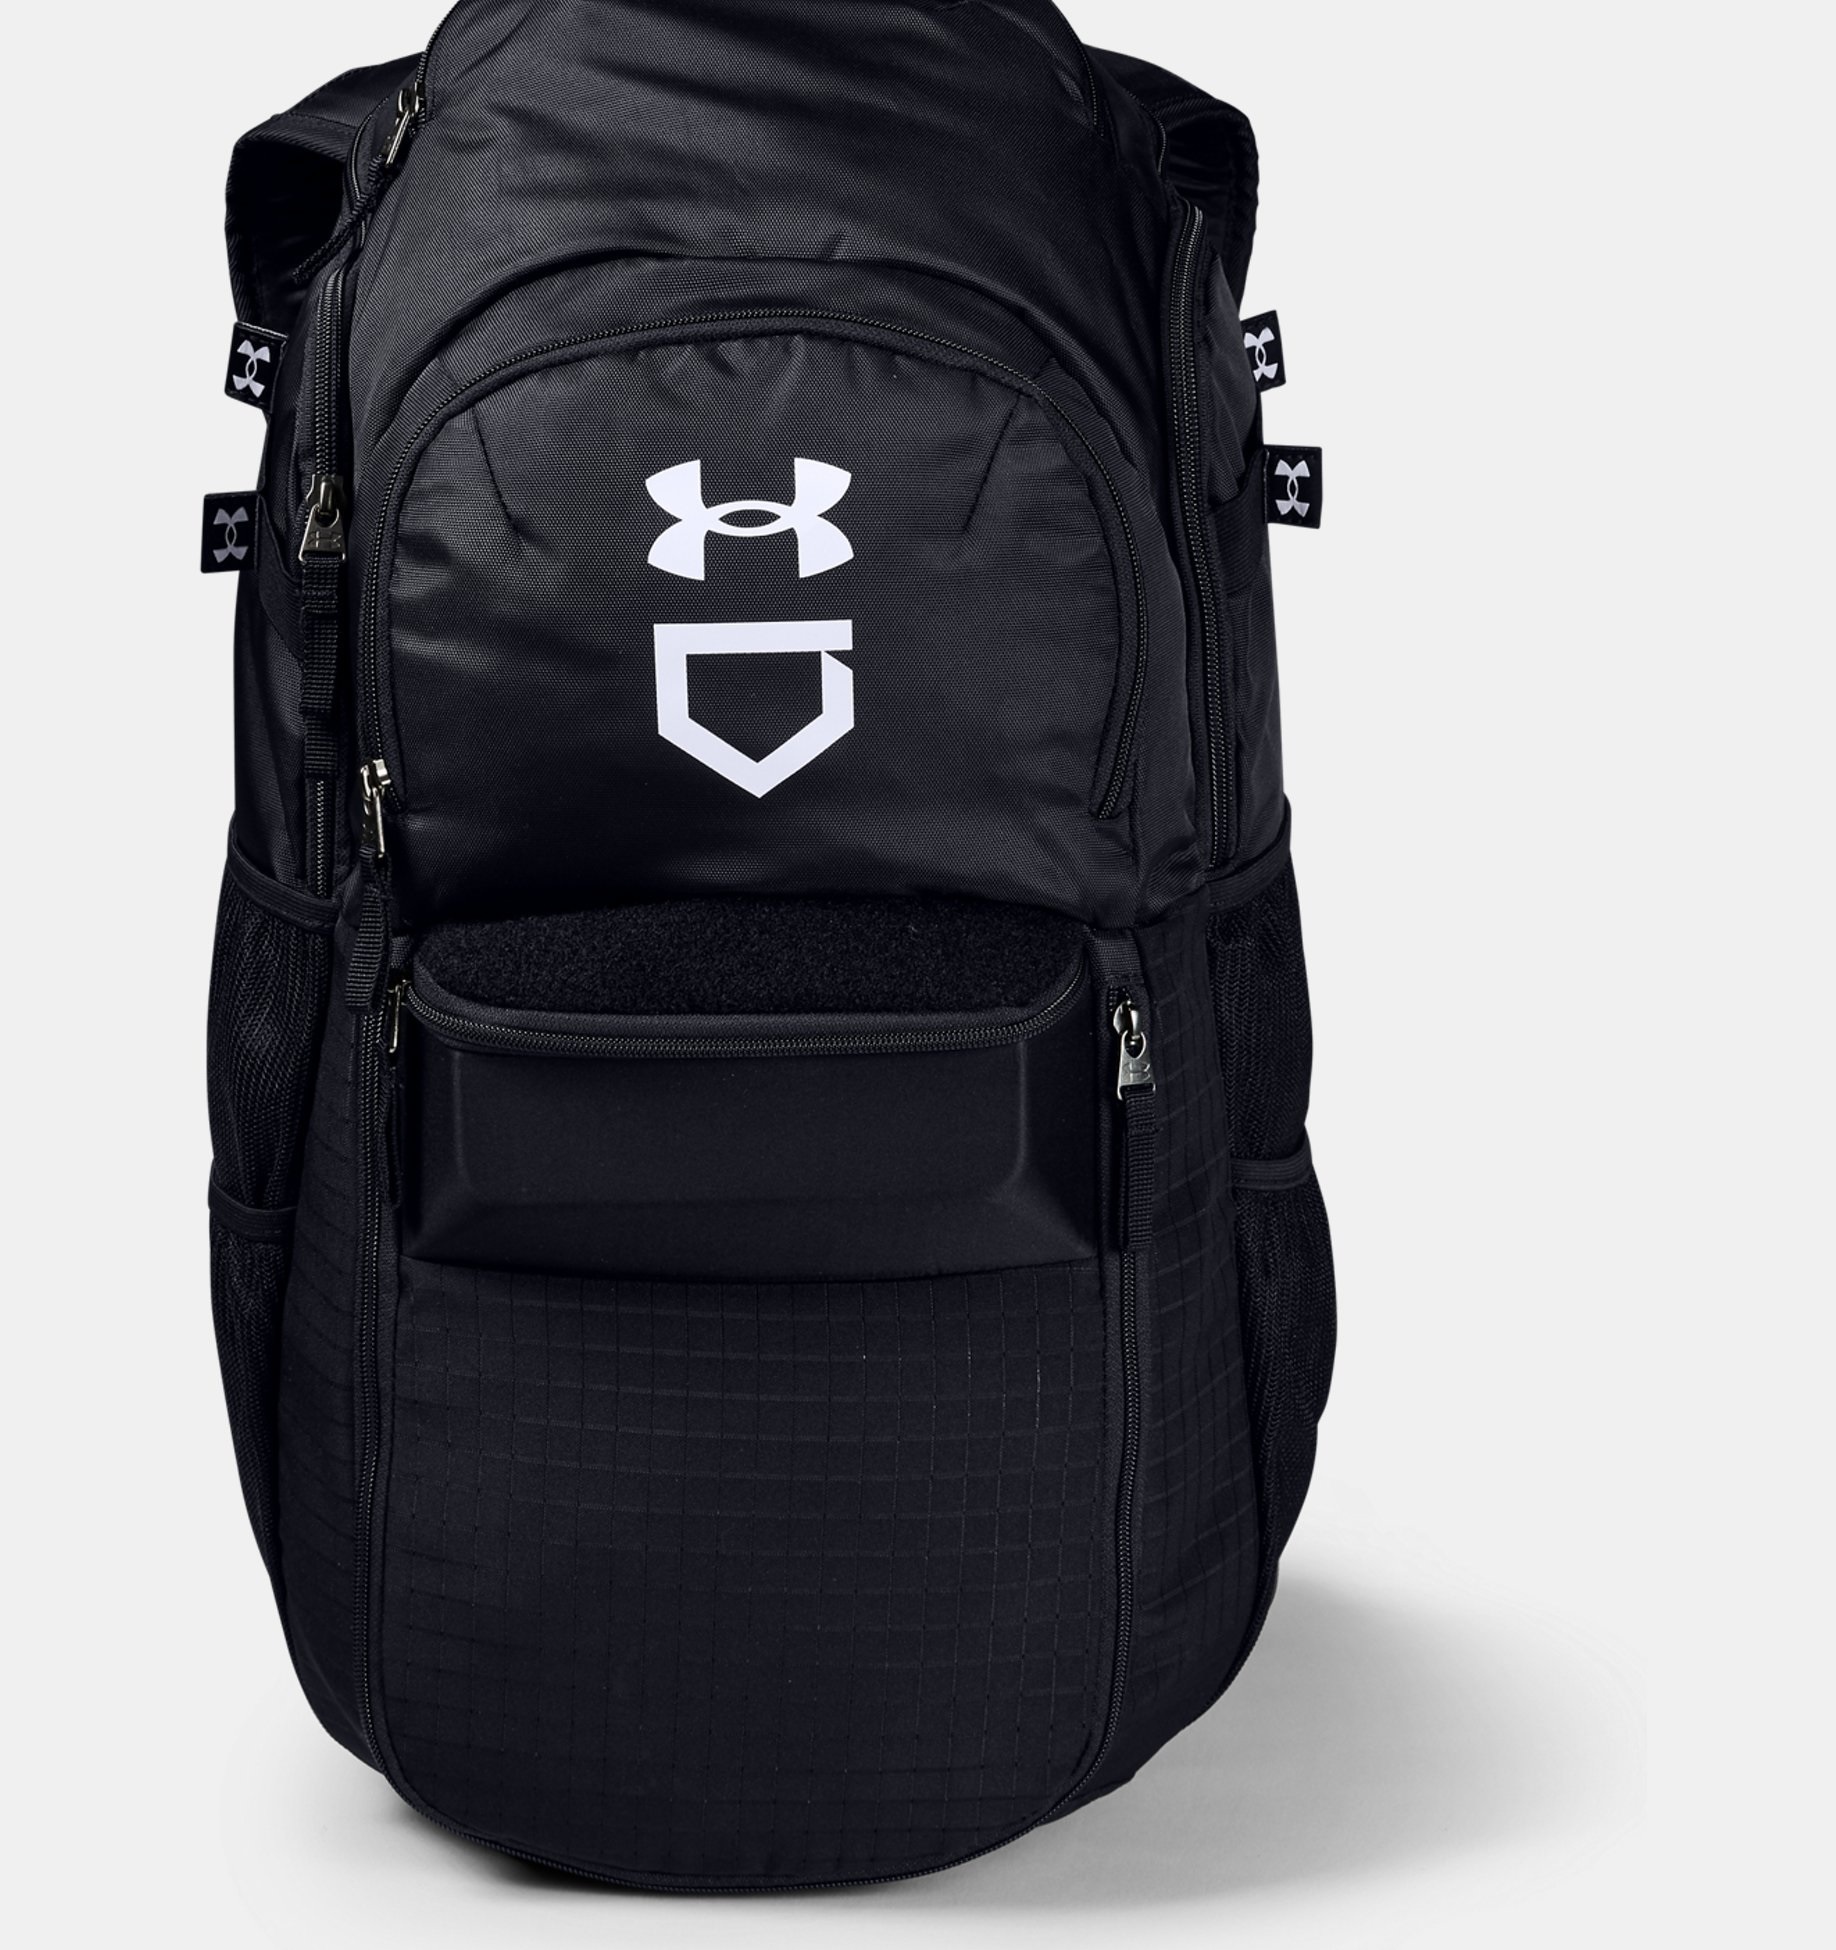 UNDER ARMOUR YARD BASEBALL BACKPACK - Sportwheels Sports Excellence